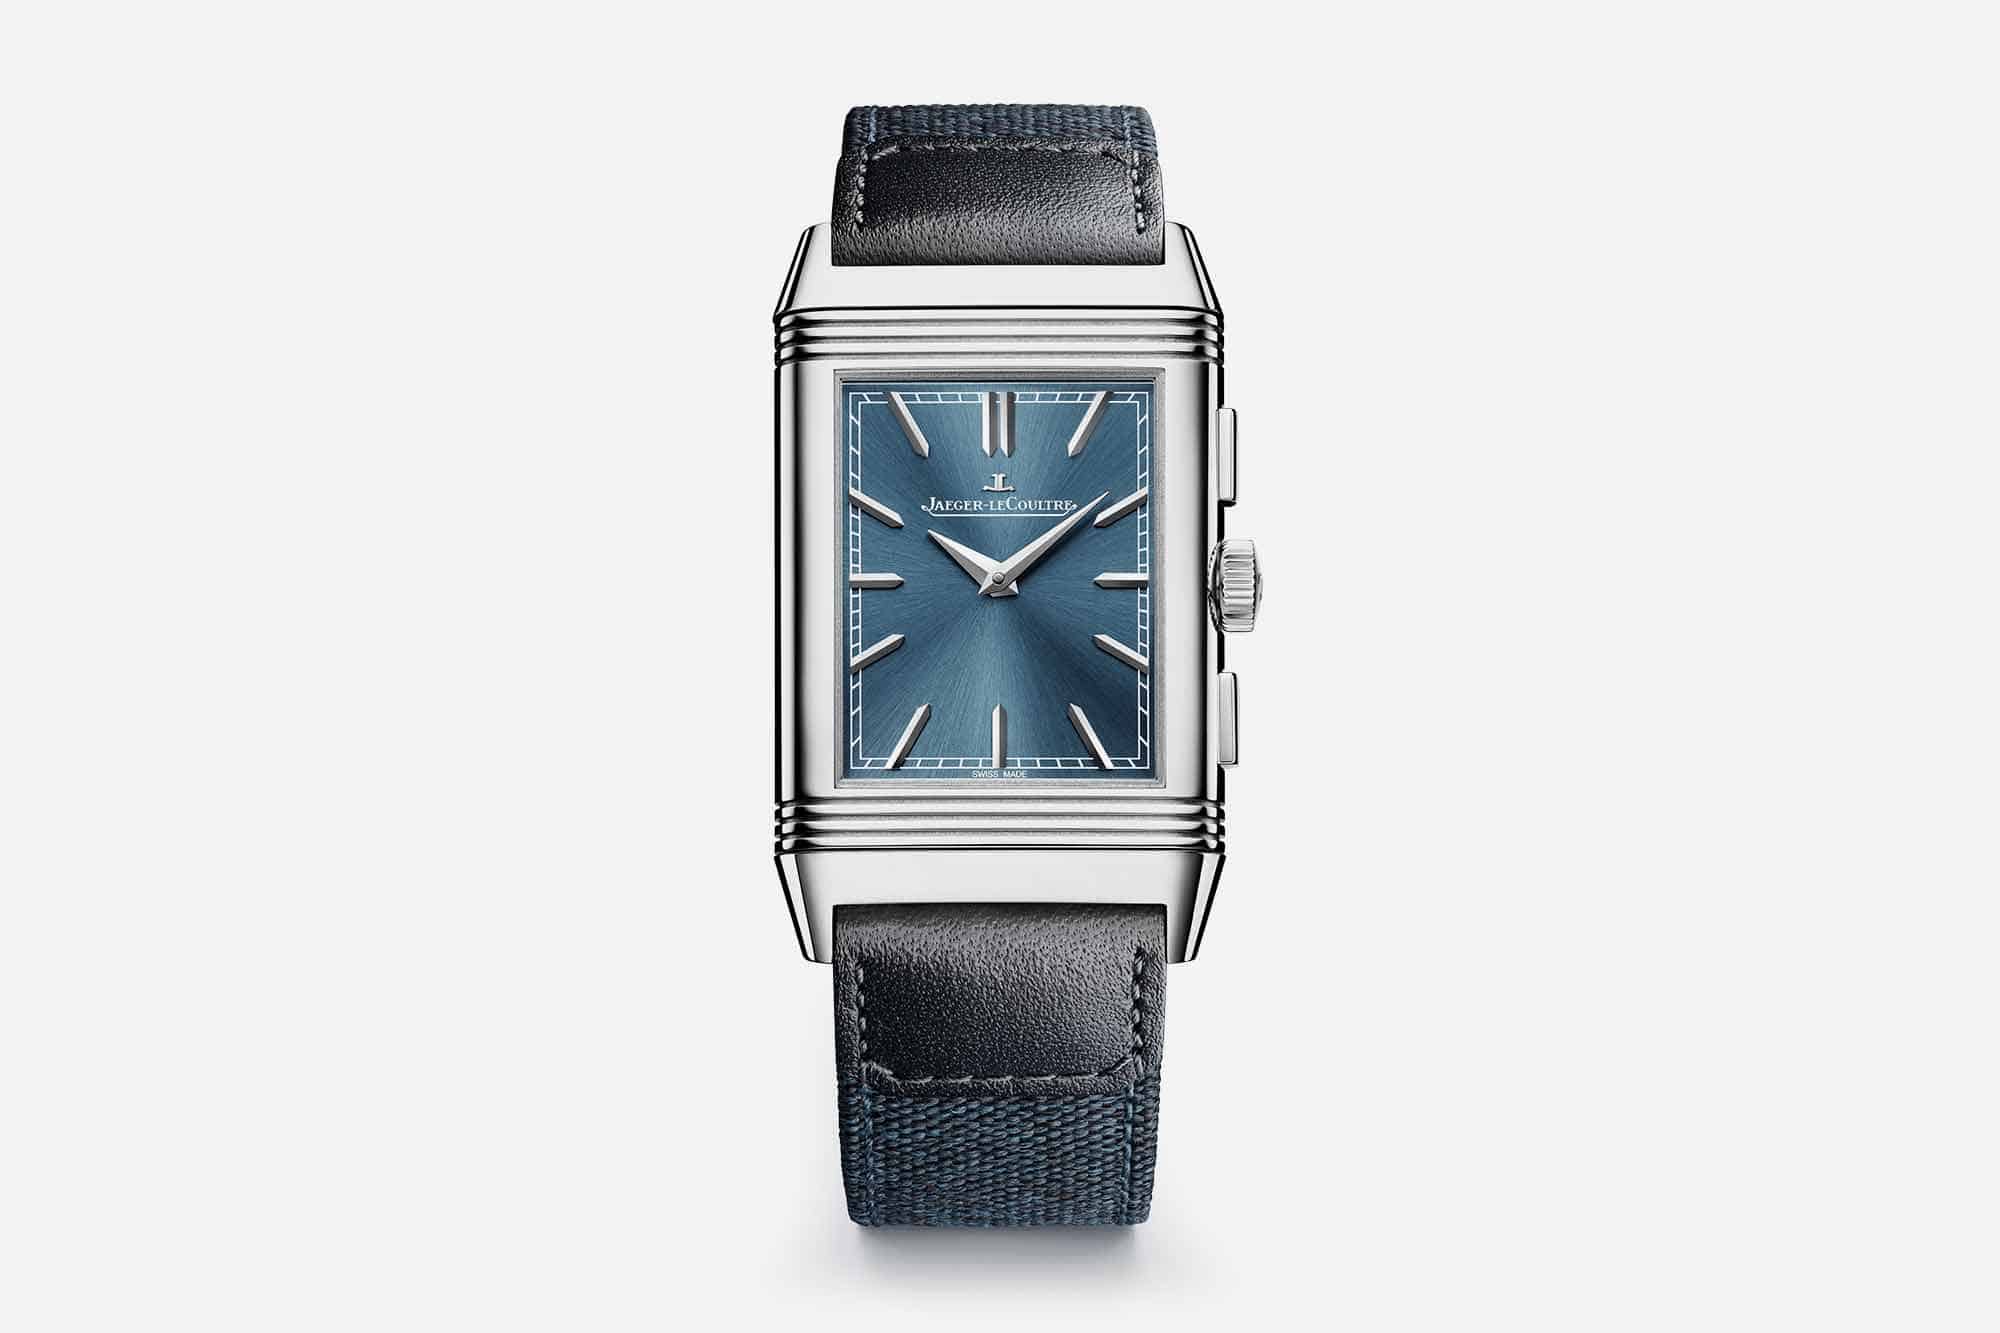 The New Jaeger-LeCoultre Reverso Tribute Chronograph Has One of the Most Ingenious Chrono Displays We’ve Seen